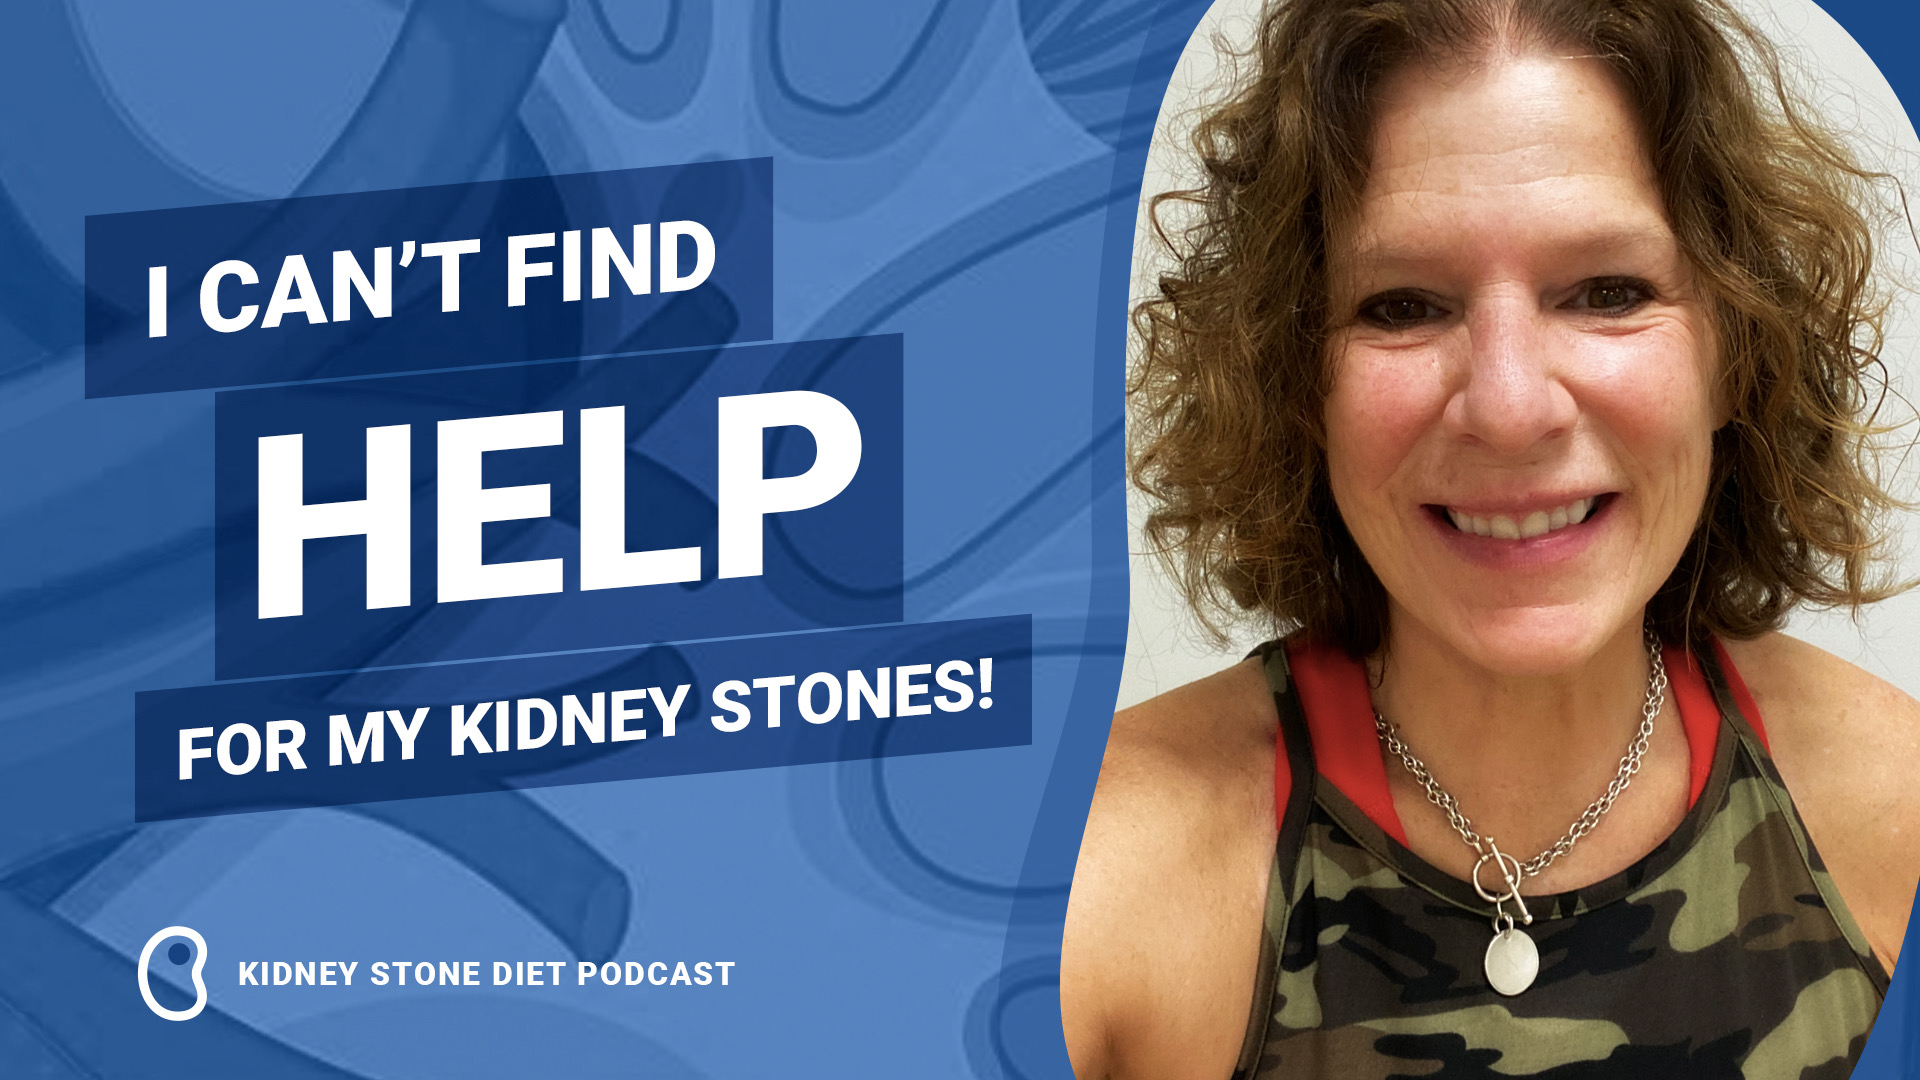 I can’t find help for my kidney stones!